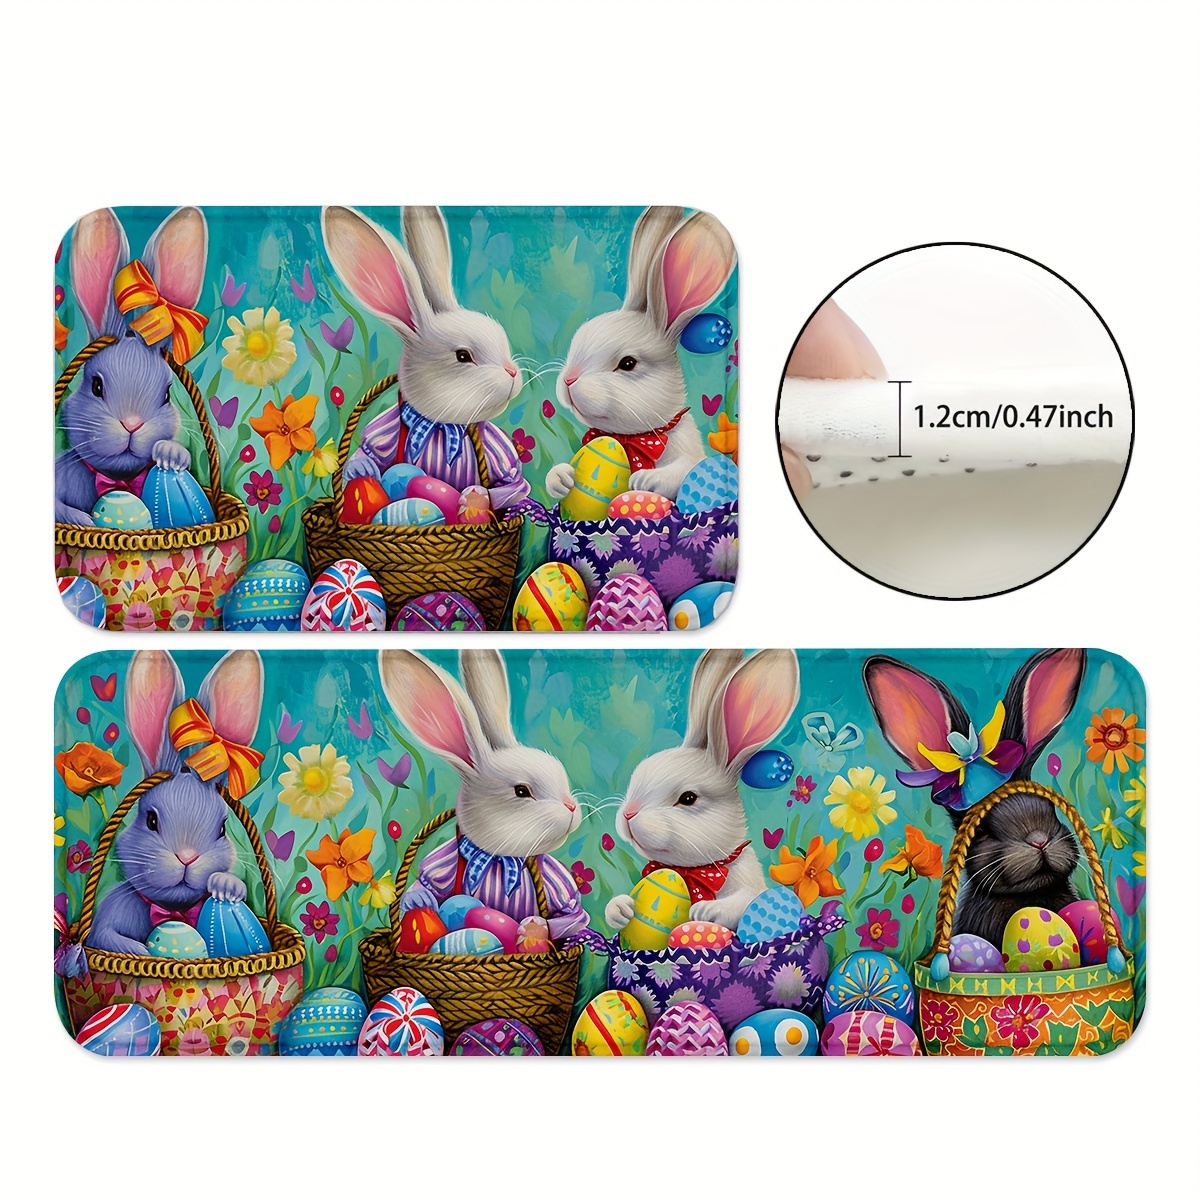 

1/2pcs Cartoon Bunny Pattern Kitchen Mats, Durable Foyer Pads, Anti-skid Runner Rugs, Carpets For Home Office Sink Laundry Room Bathroom Spring Decor Easter Hotel Indoors